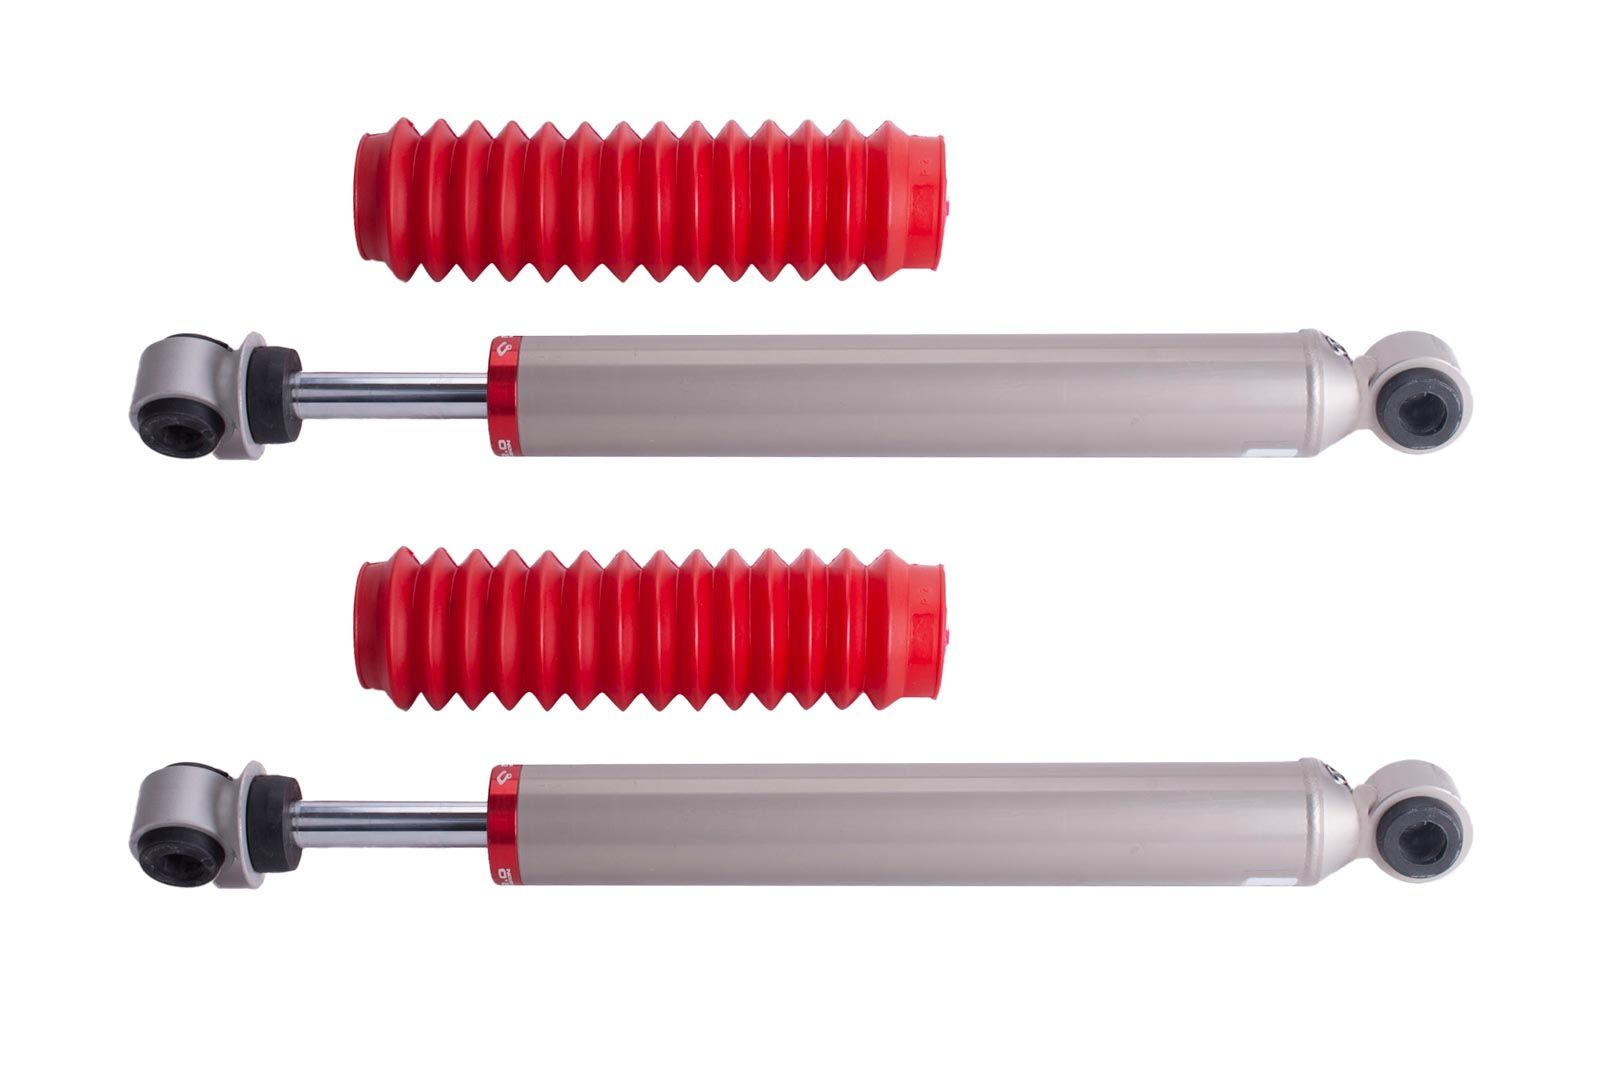 Carbon Offroad rear Shock absorbers to suit Holden Colorado/Isuzu Dmax (pair)